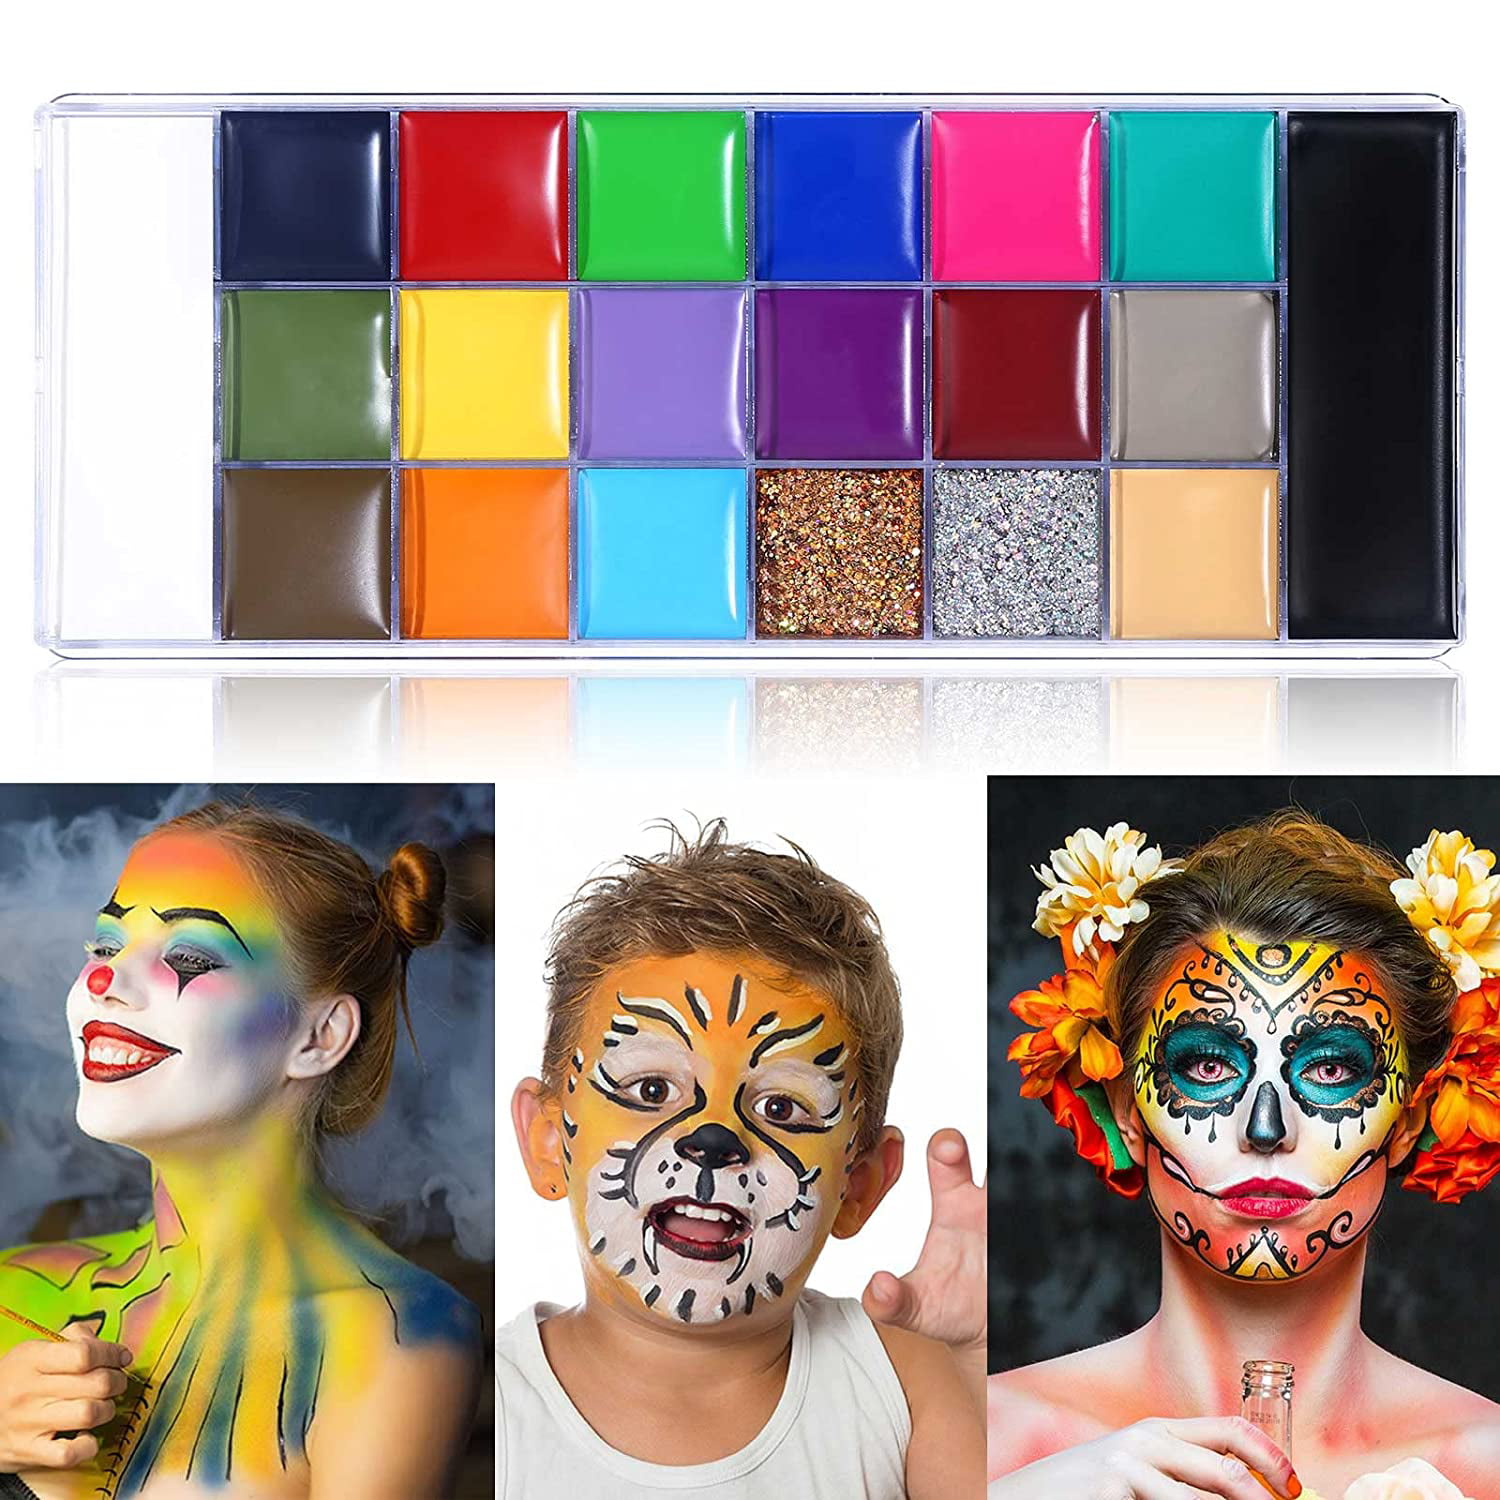 UCANBE Athena Painting Oil Palette Makeup Set, 20 Colors Face Body Paint  Halloween Costume Party SFX with 4 pcs Stencil Temporary Tattoos Art  Template kit for Adults Man Women Kids Teenager 